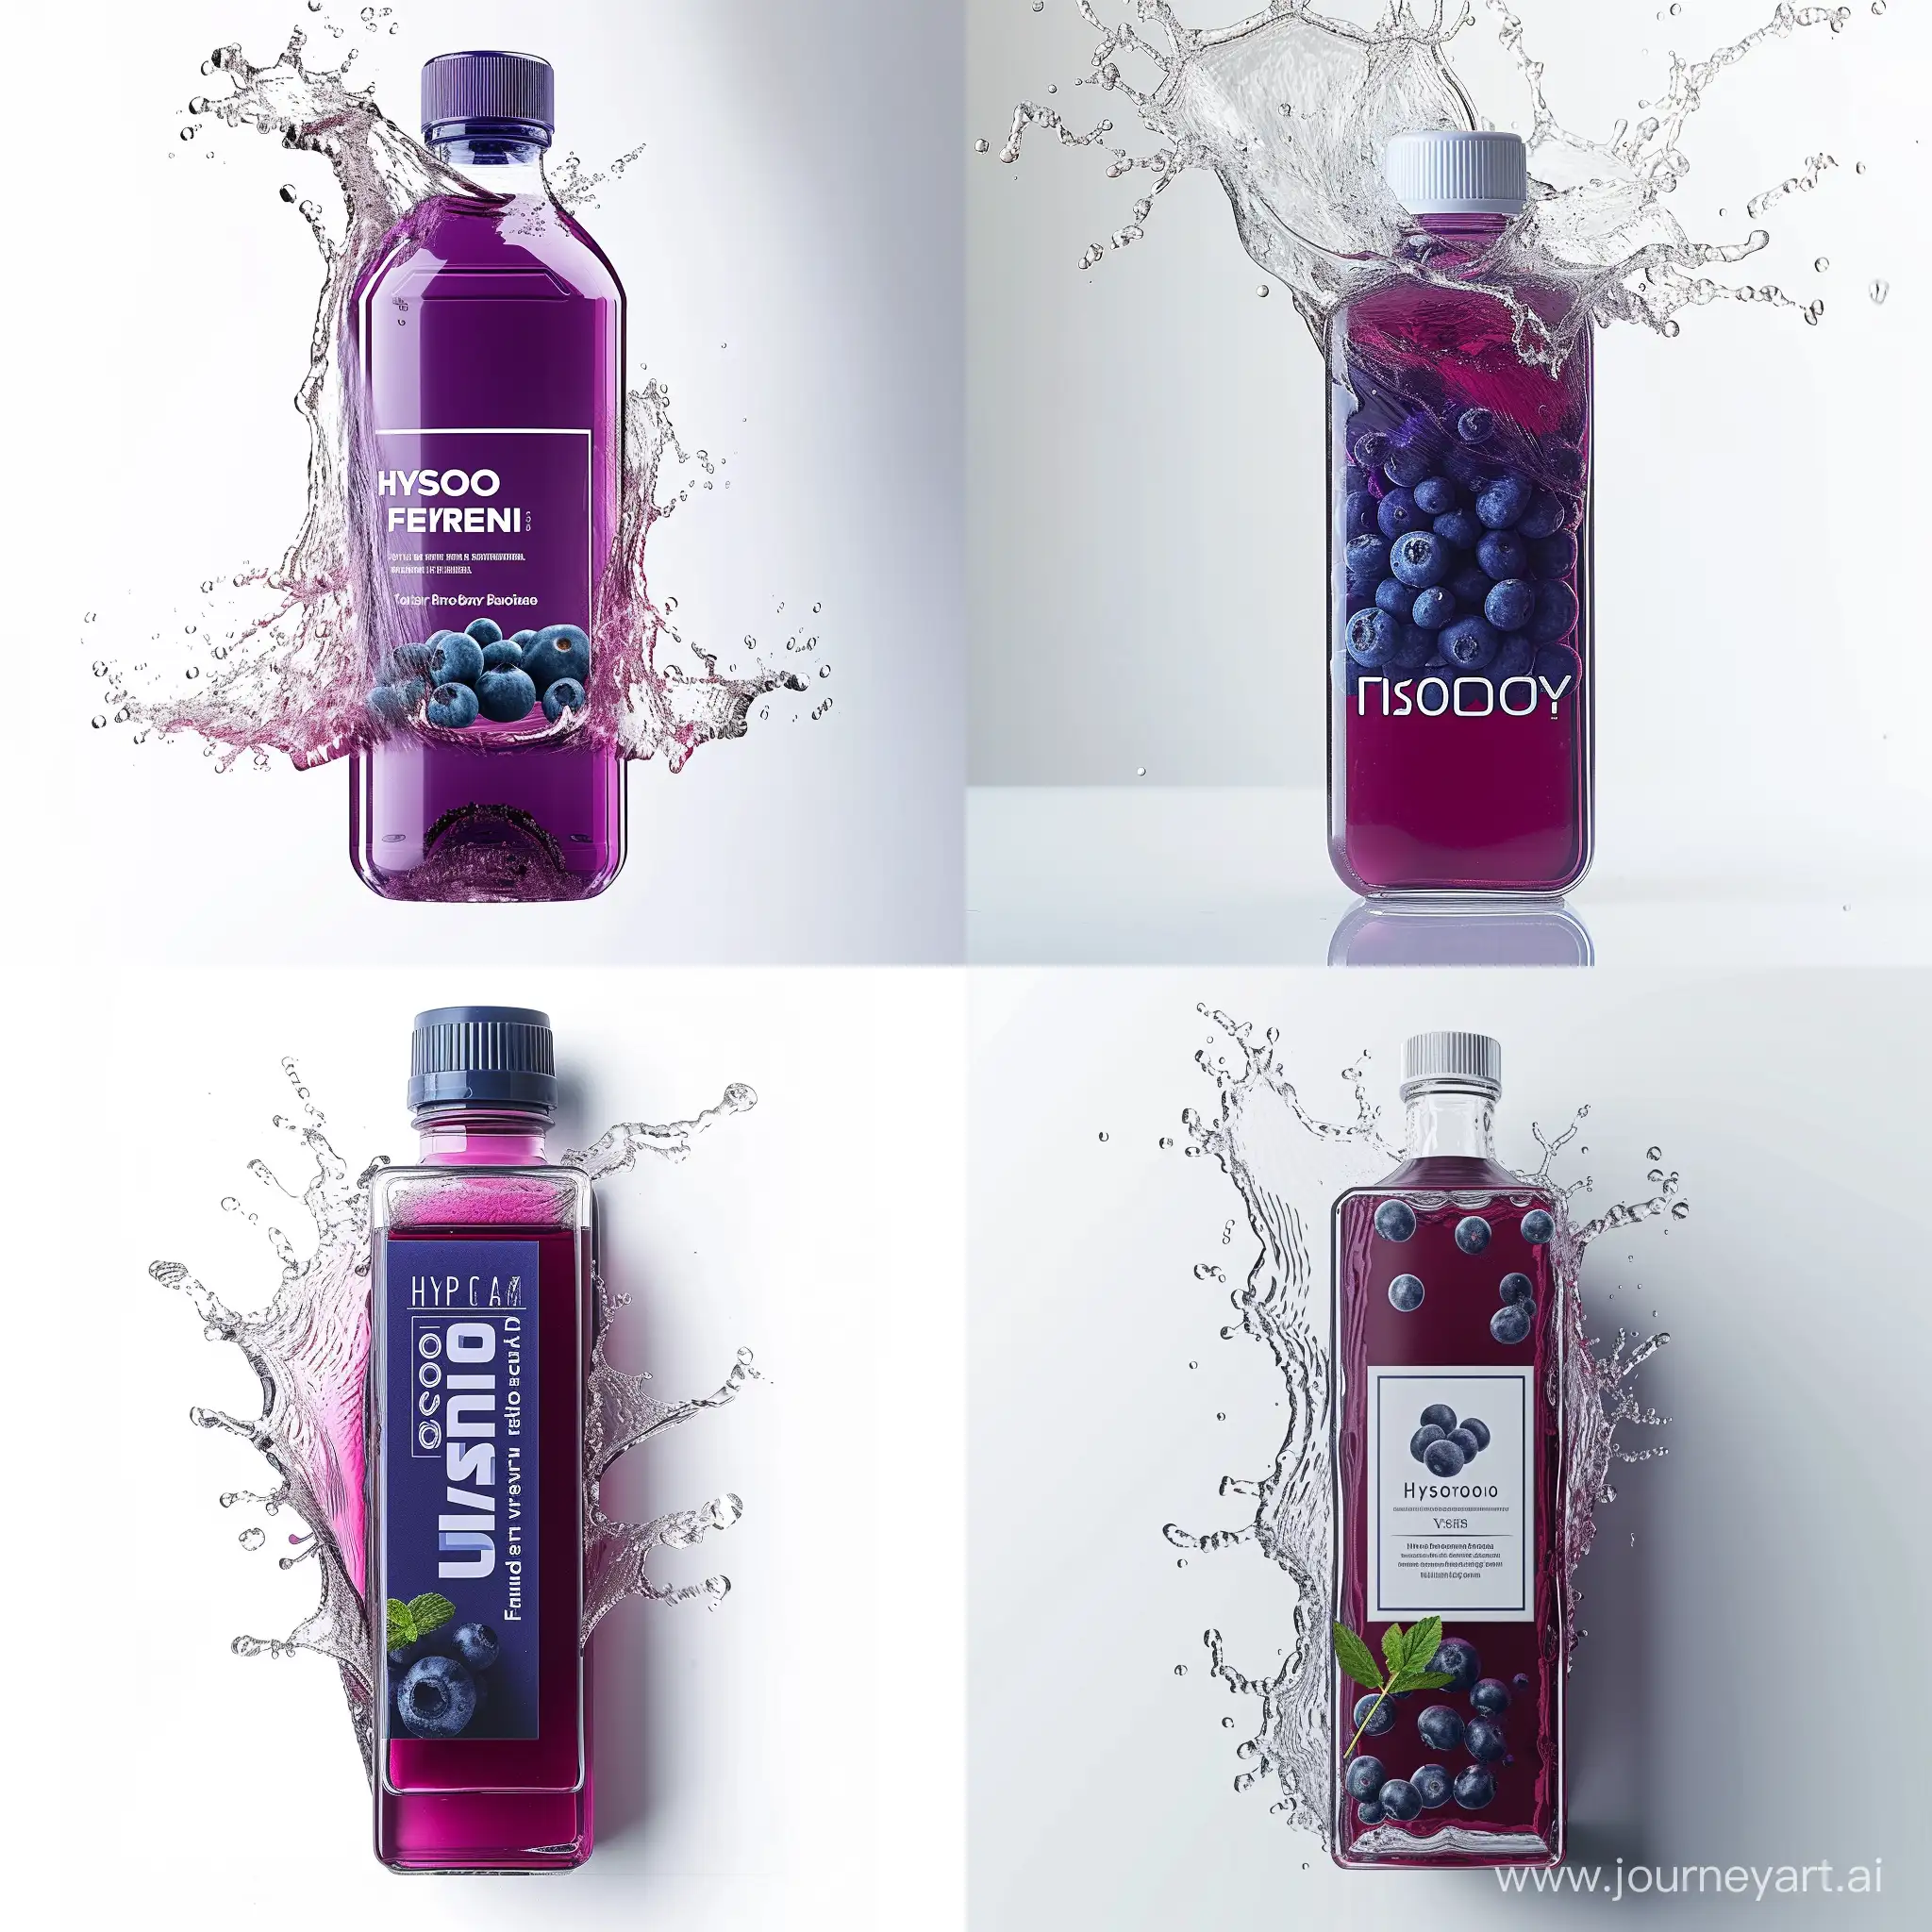 Hyotonic-Blueberry-Fruit-Flavored-Beverage-with-Minimalistic-Graphic-Design